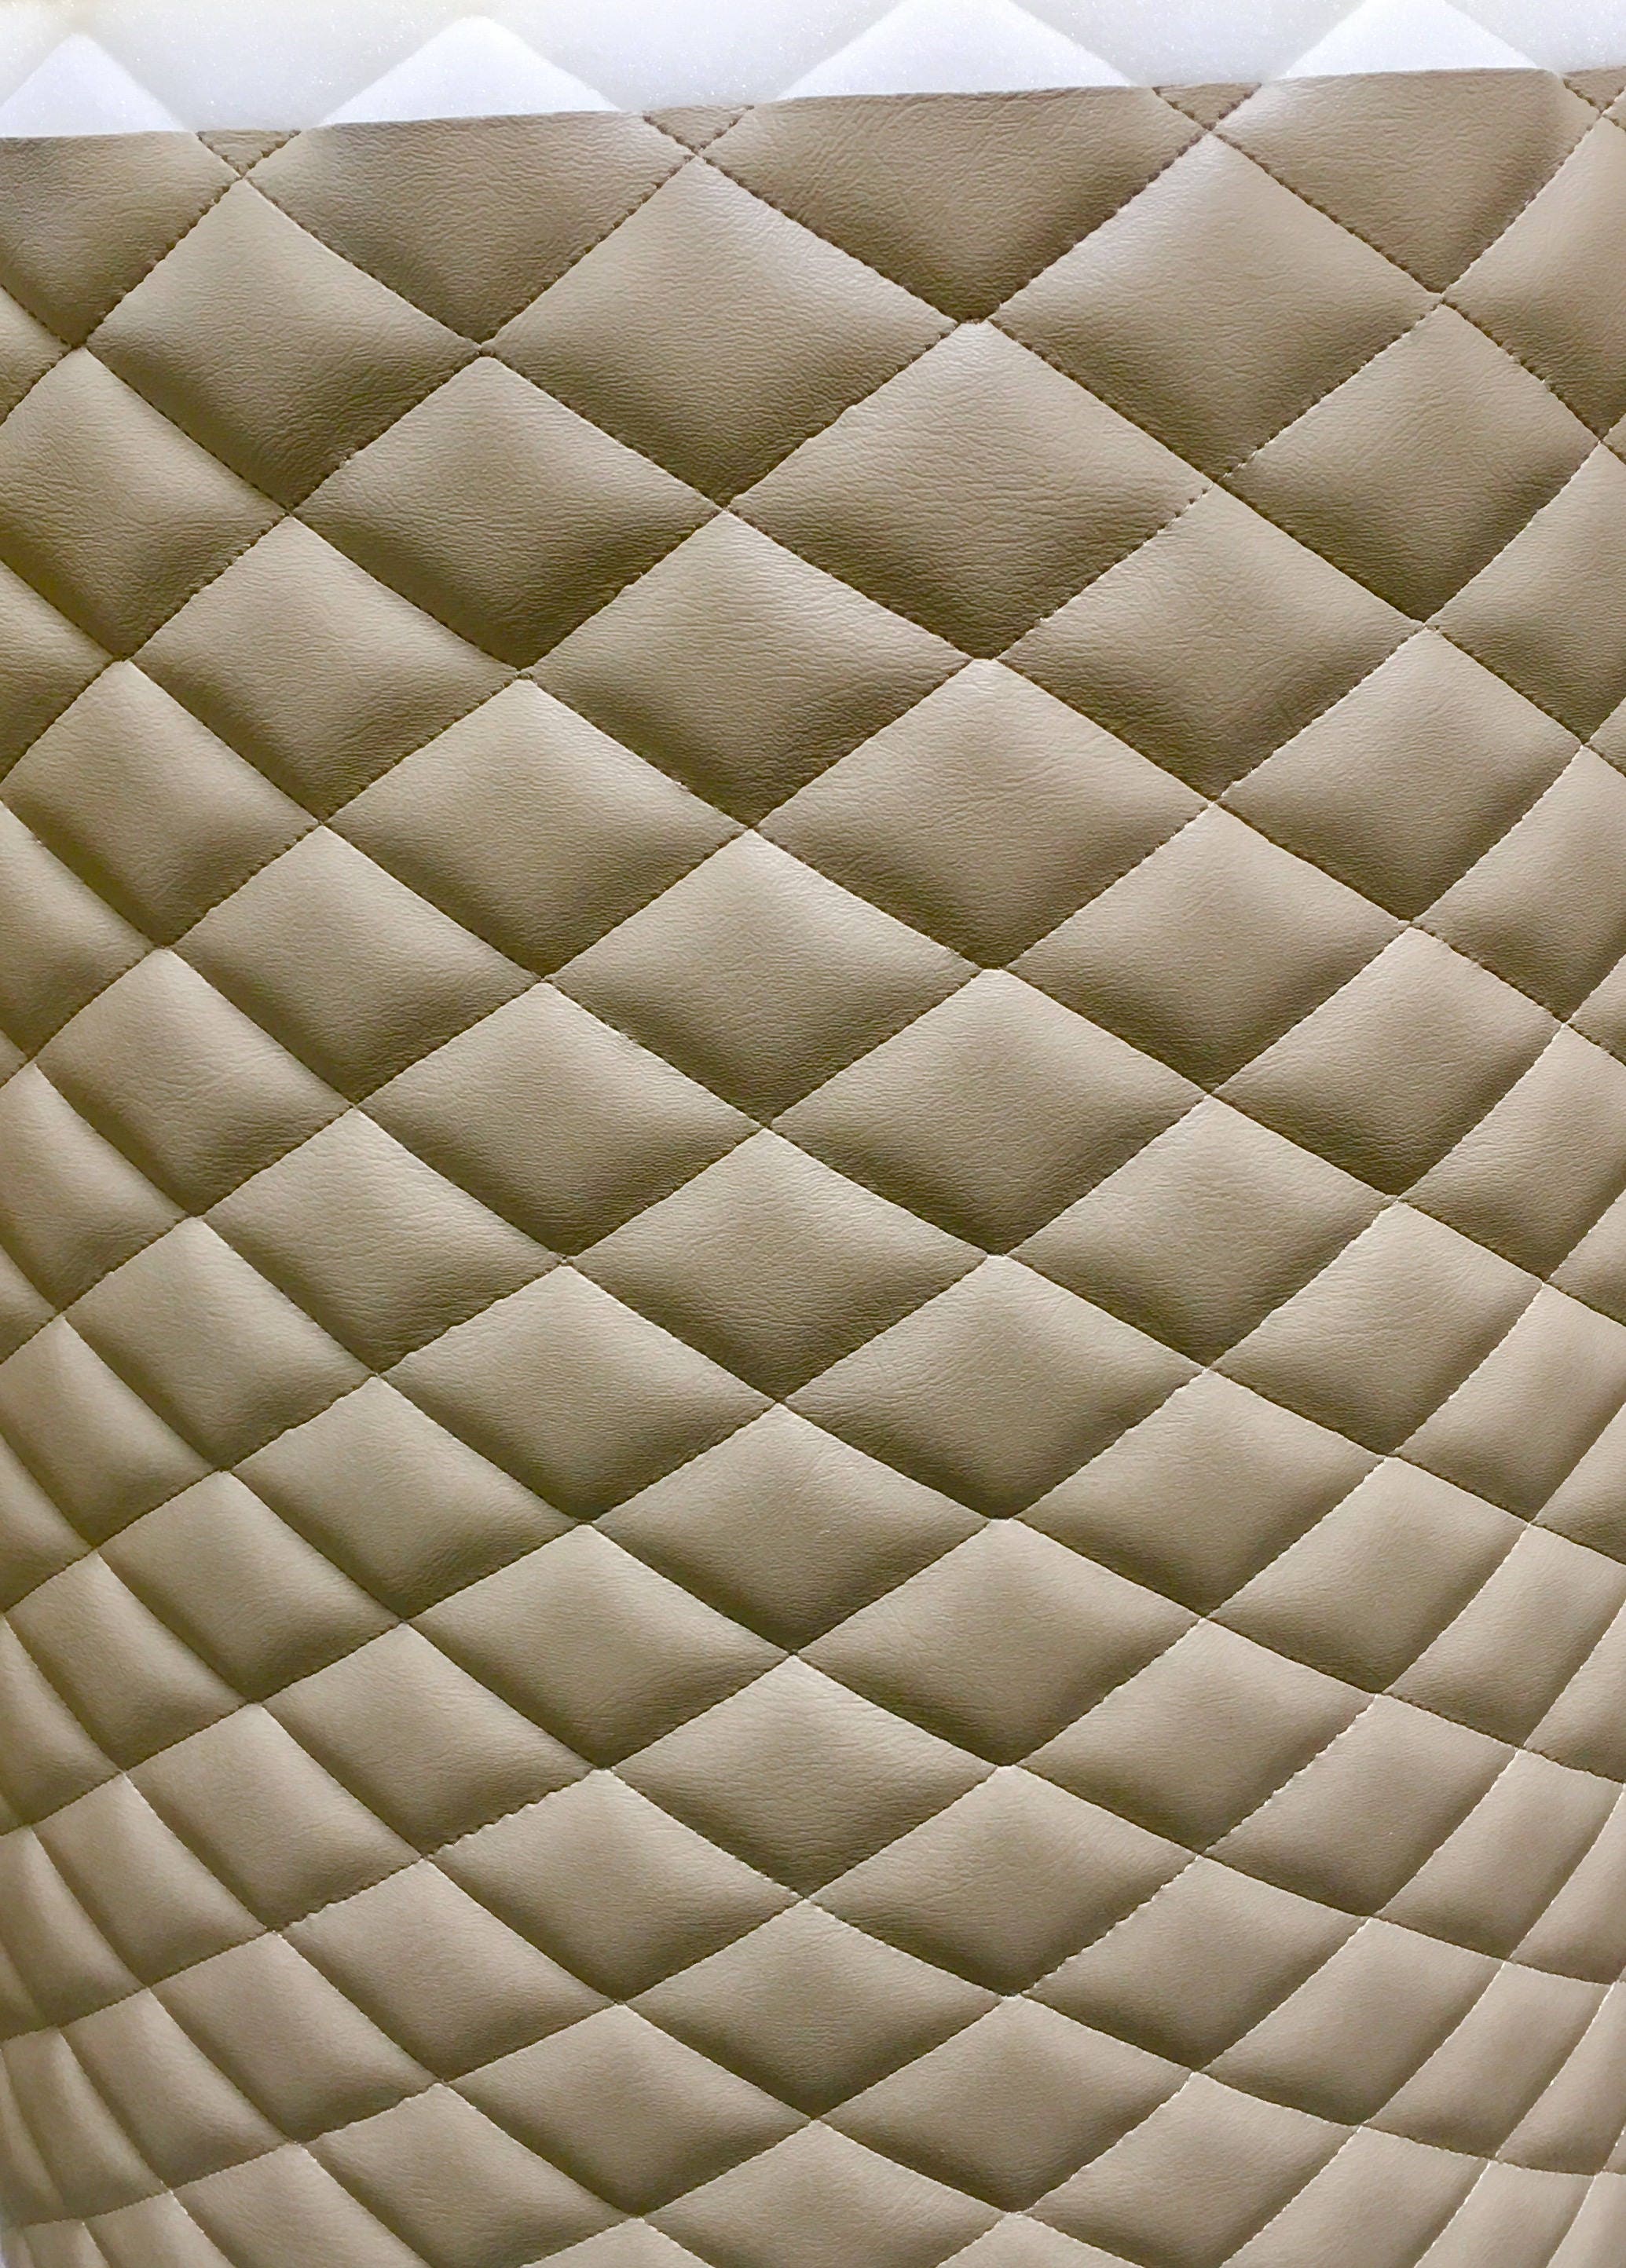 Wholesale Marine CNC Quilted Upholstery Fabric